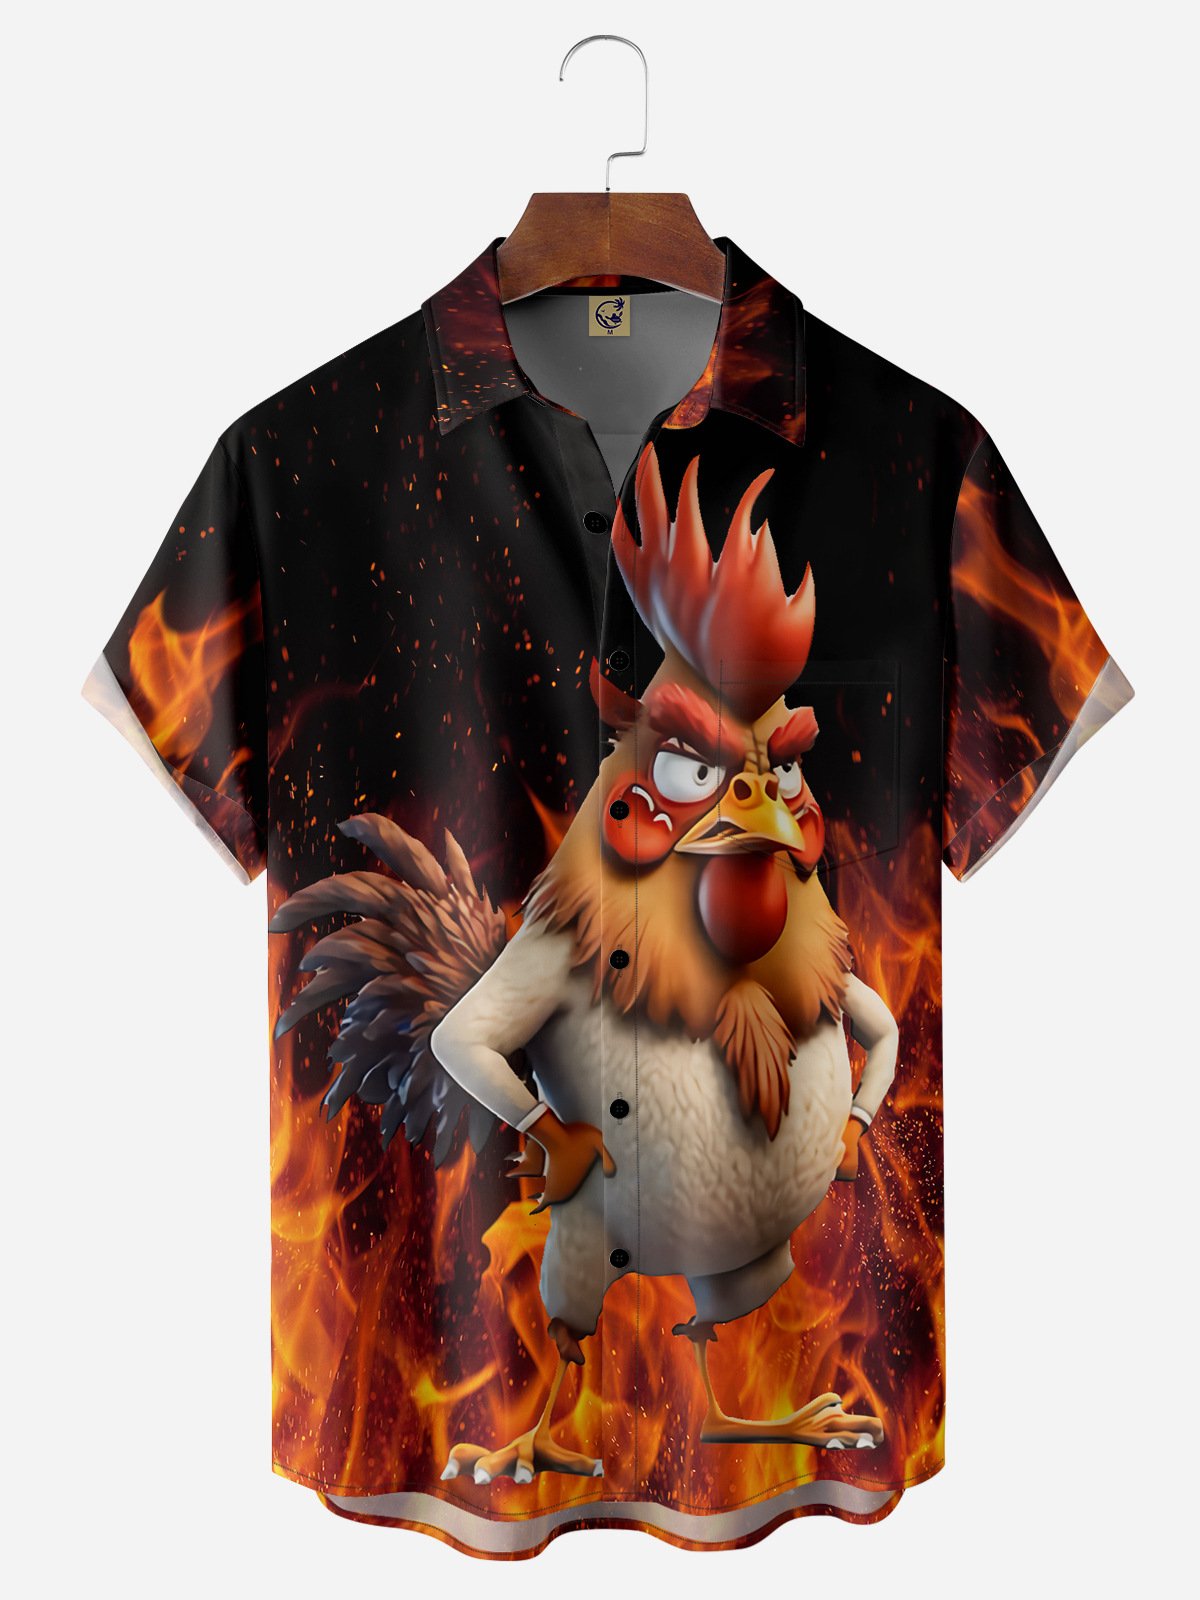 Hardaddy Angry Rooster Chest Pocket Short Sleeve Casual Shirt